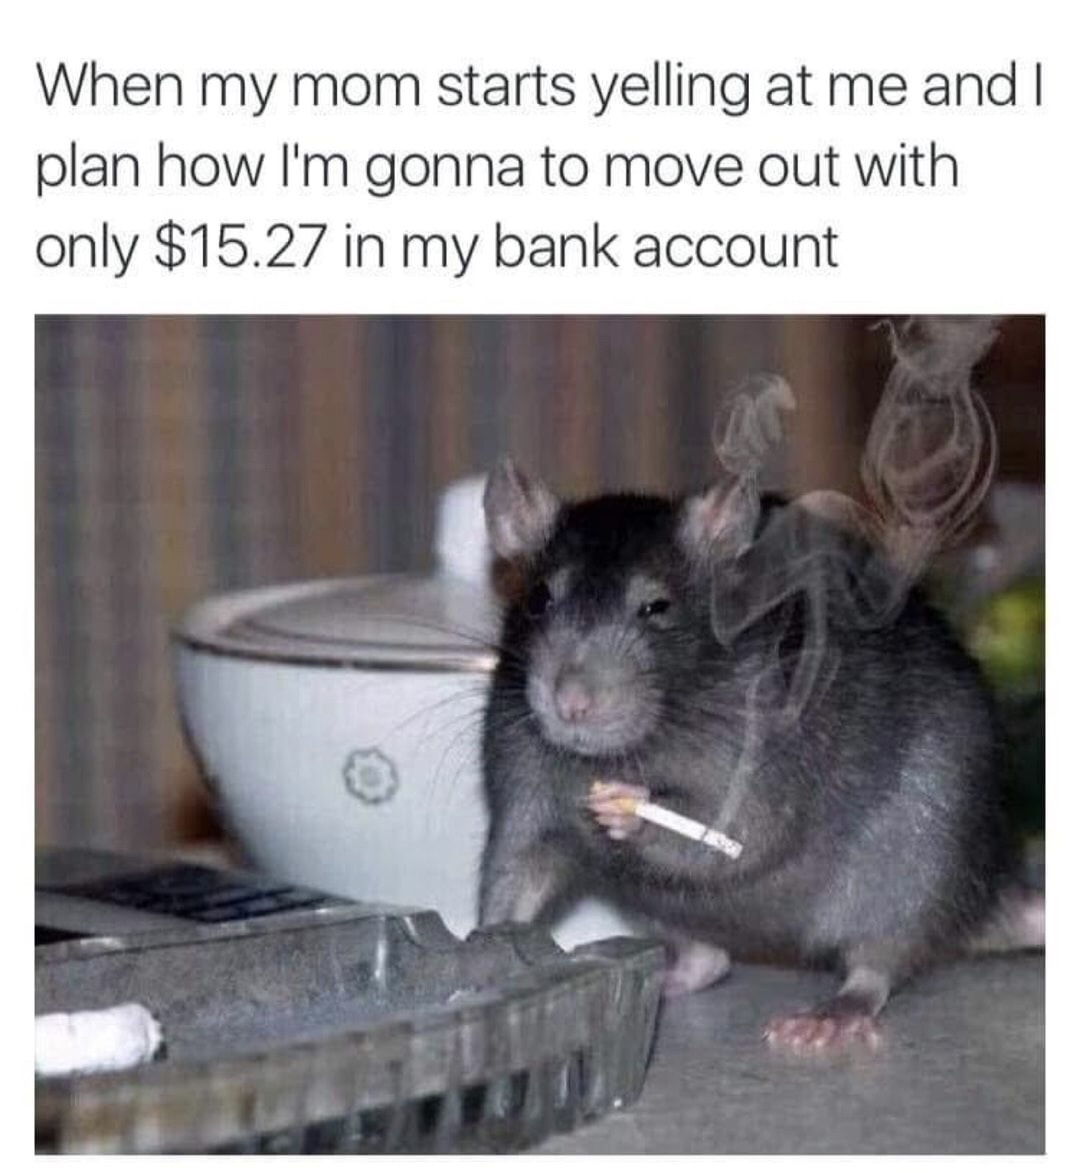 memes - rat smoking - When my mom starts yelling at me and I plan how I'm gonna to move out with only $15.27 in my bank account